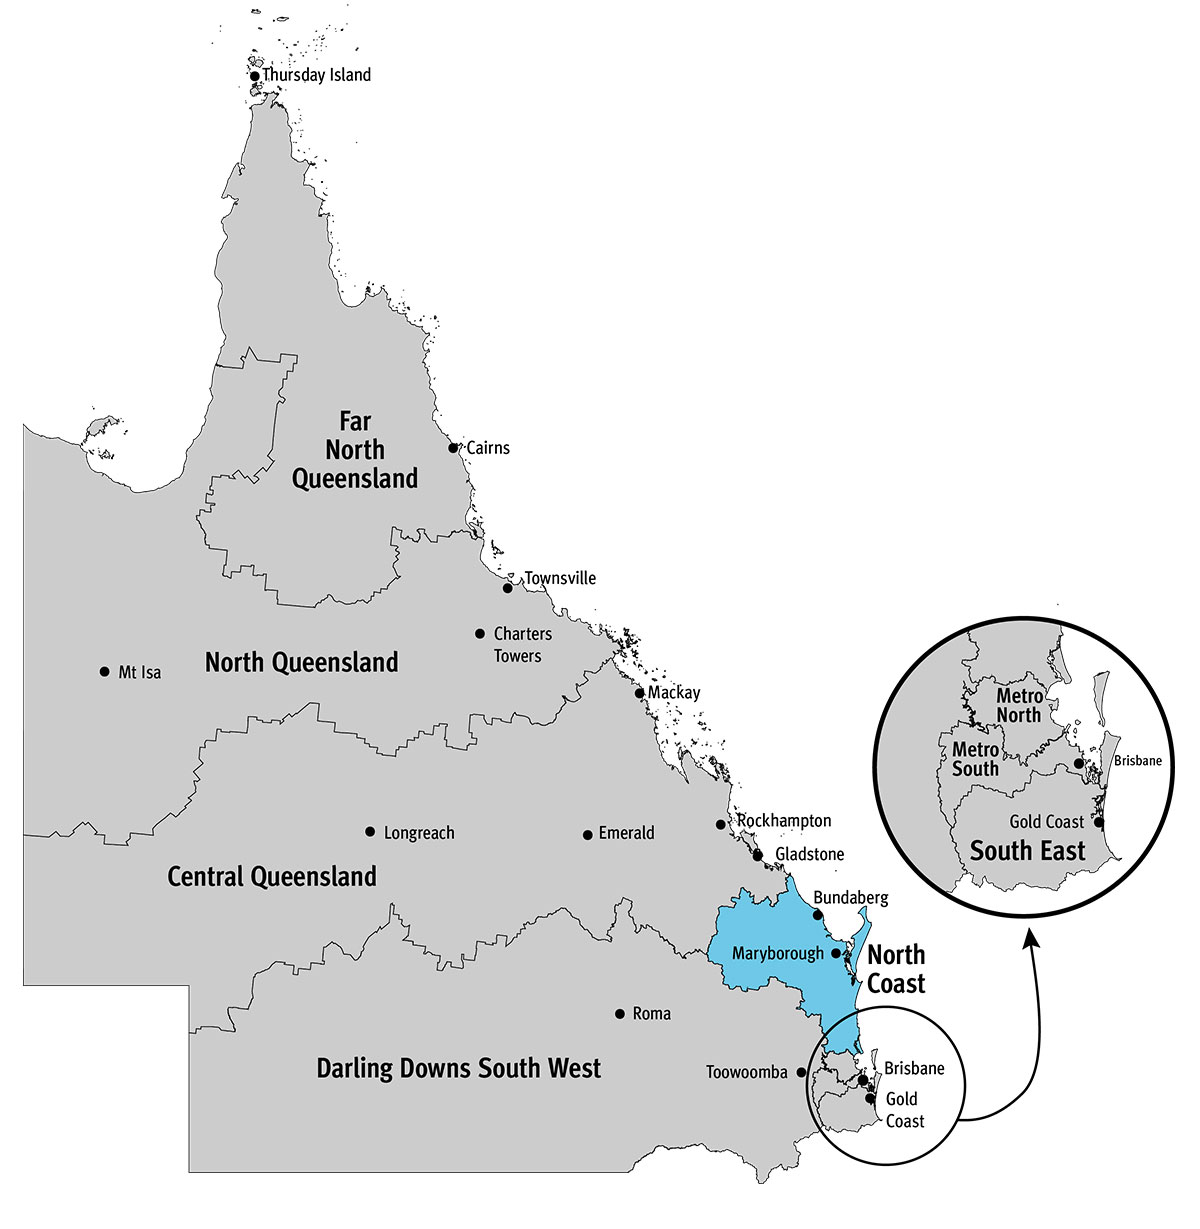 Queensland map with North Coast region highlighted. Bundaberg and Maryborough are included in this region.